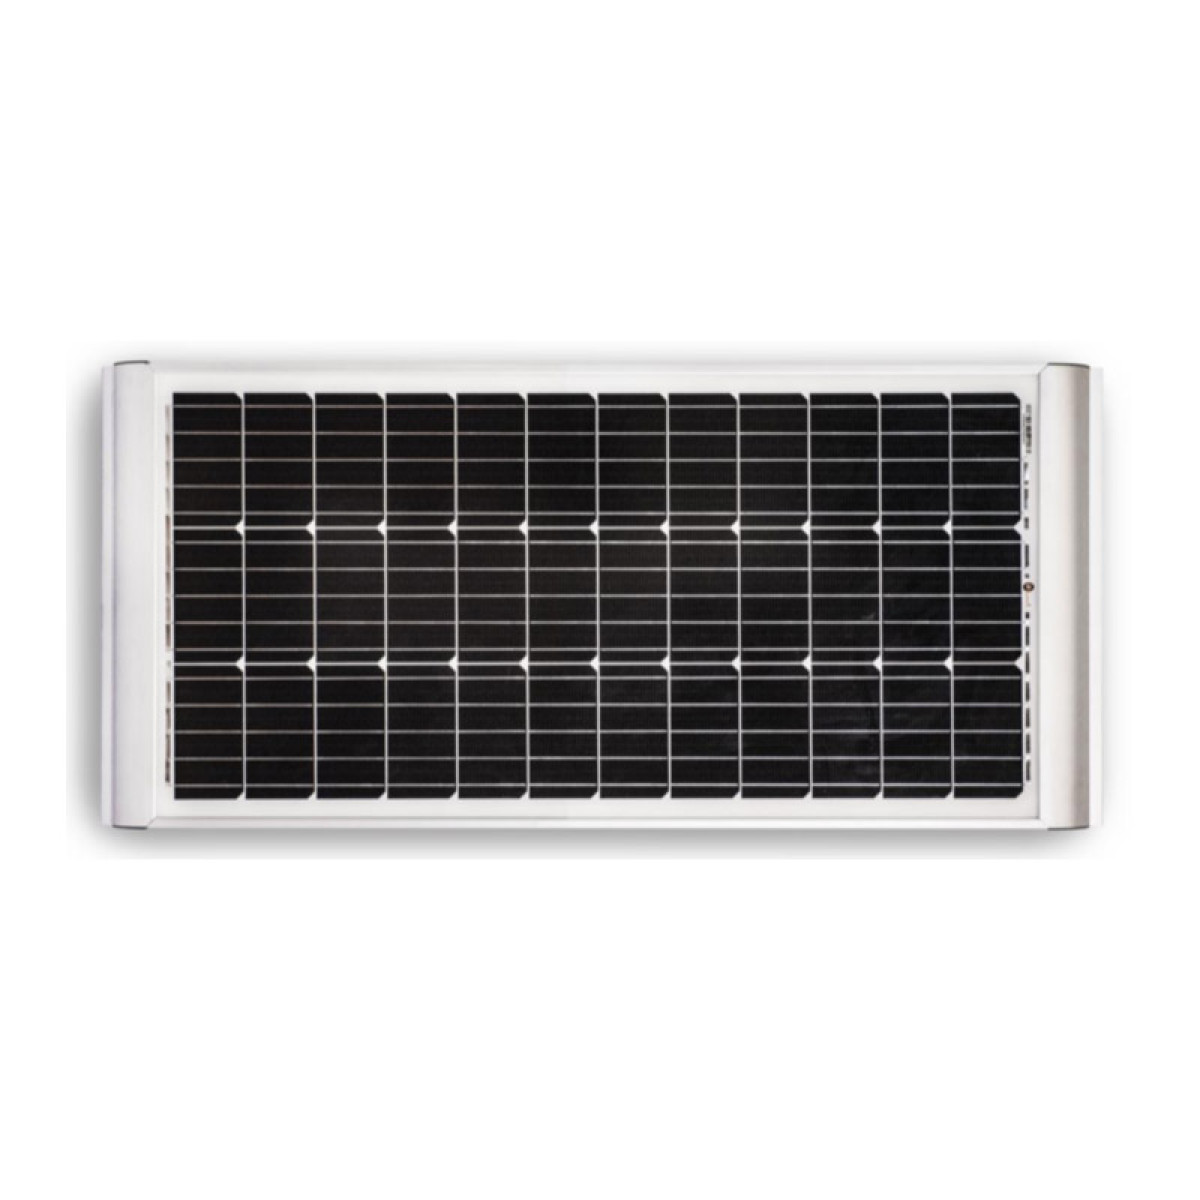 Solarpanel 90W SR Mecatronic with fixed spoilers